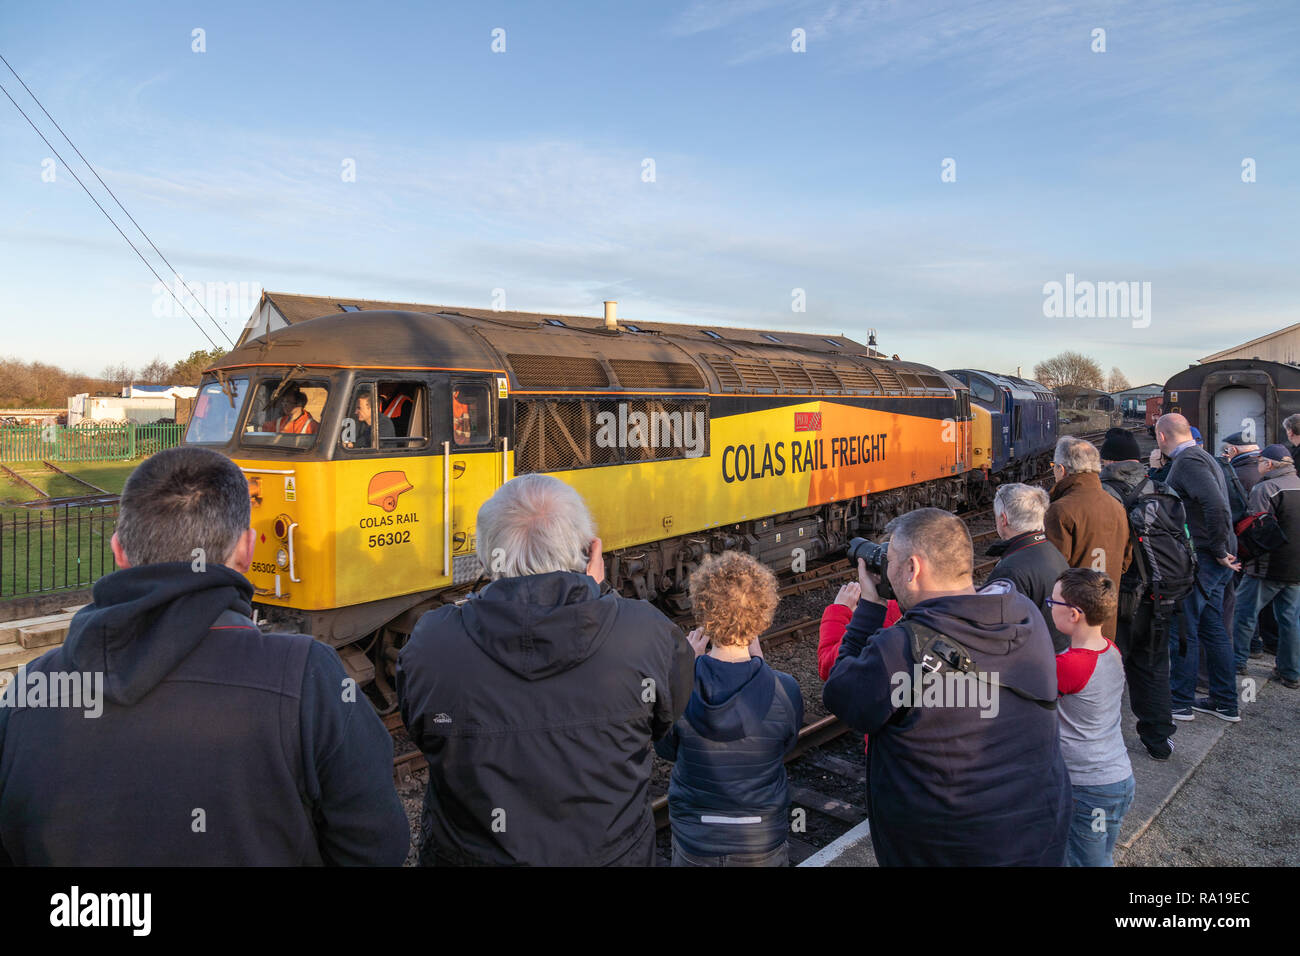 Bo’ness, Scotland, UK. 29th December 2018. The Bo’ness and Kinneil Railway annual Winter Diesel Gala attracts hundreds of train enthusiasts from all over the UK. The event features guest diesel locomotives pulling a passenger train along the 5 mile long line from Bo’ness Station to Manuel Station. © Garry Cornes / Alamy Live News  Stock Photo